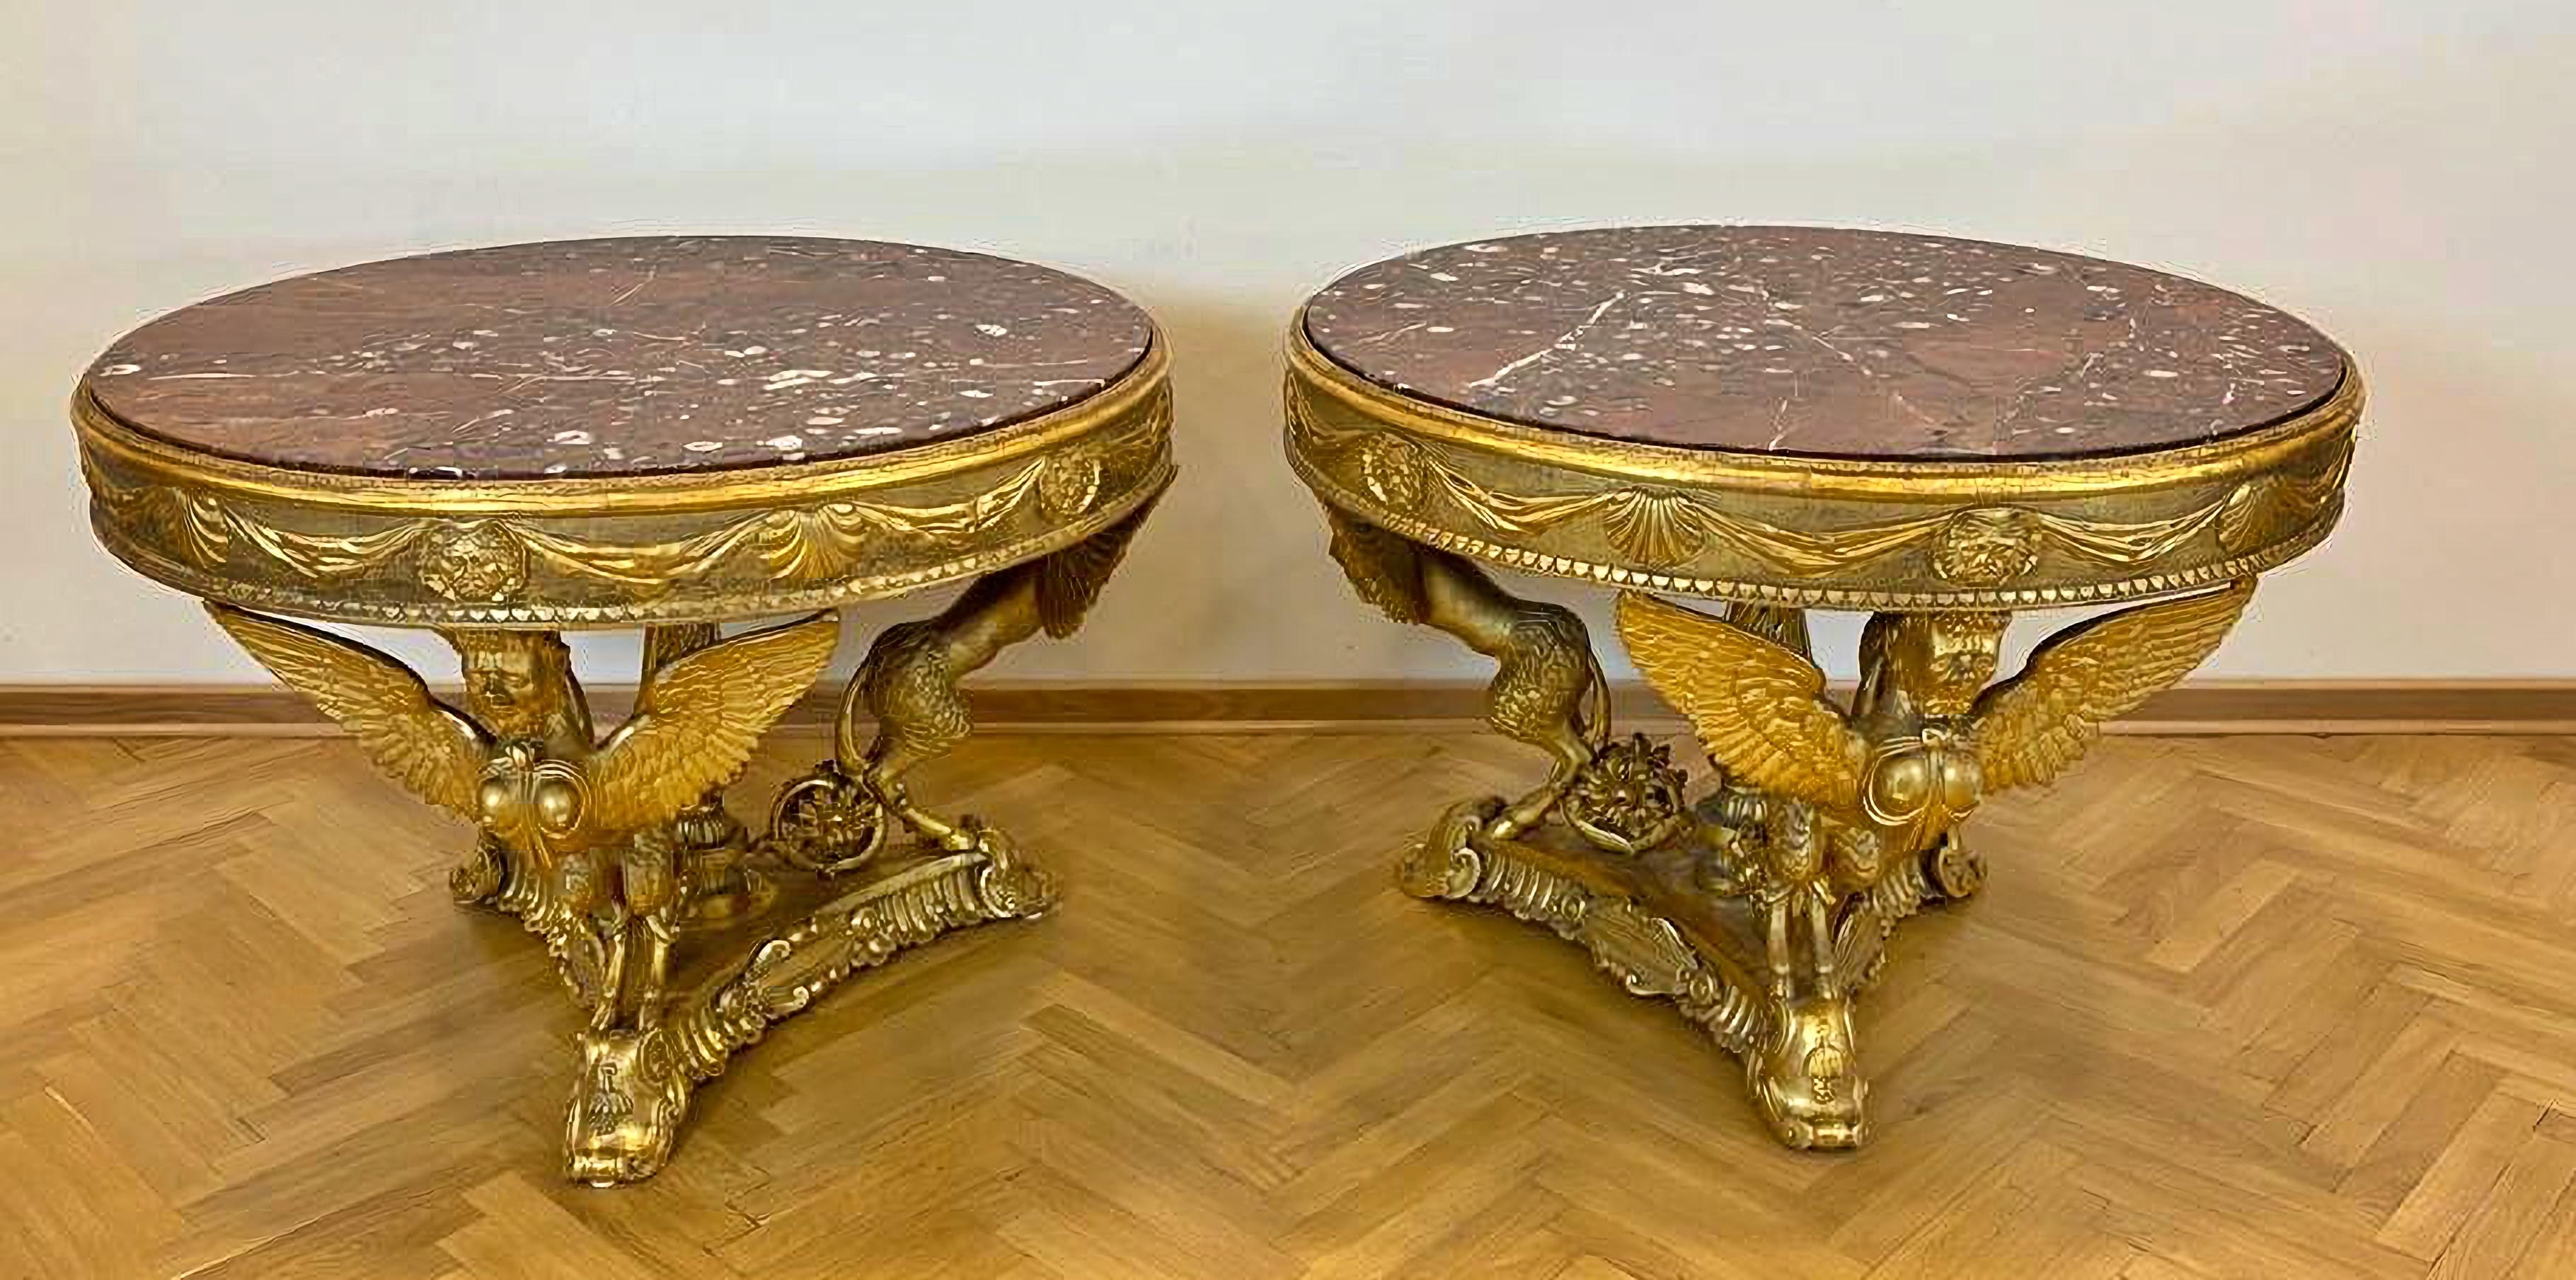 Impressive Pair of Tables First Empire Napoleon III Early 19th Century For Sale 6